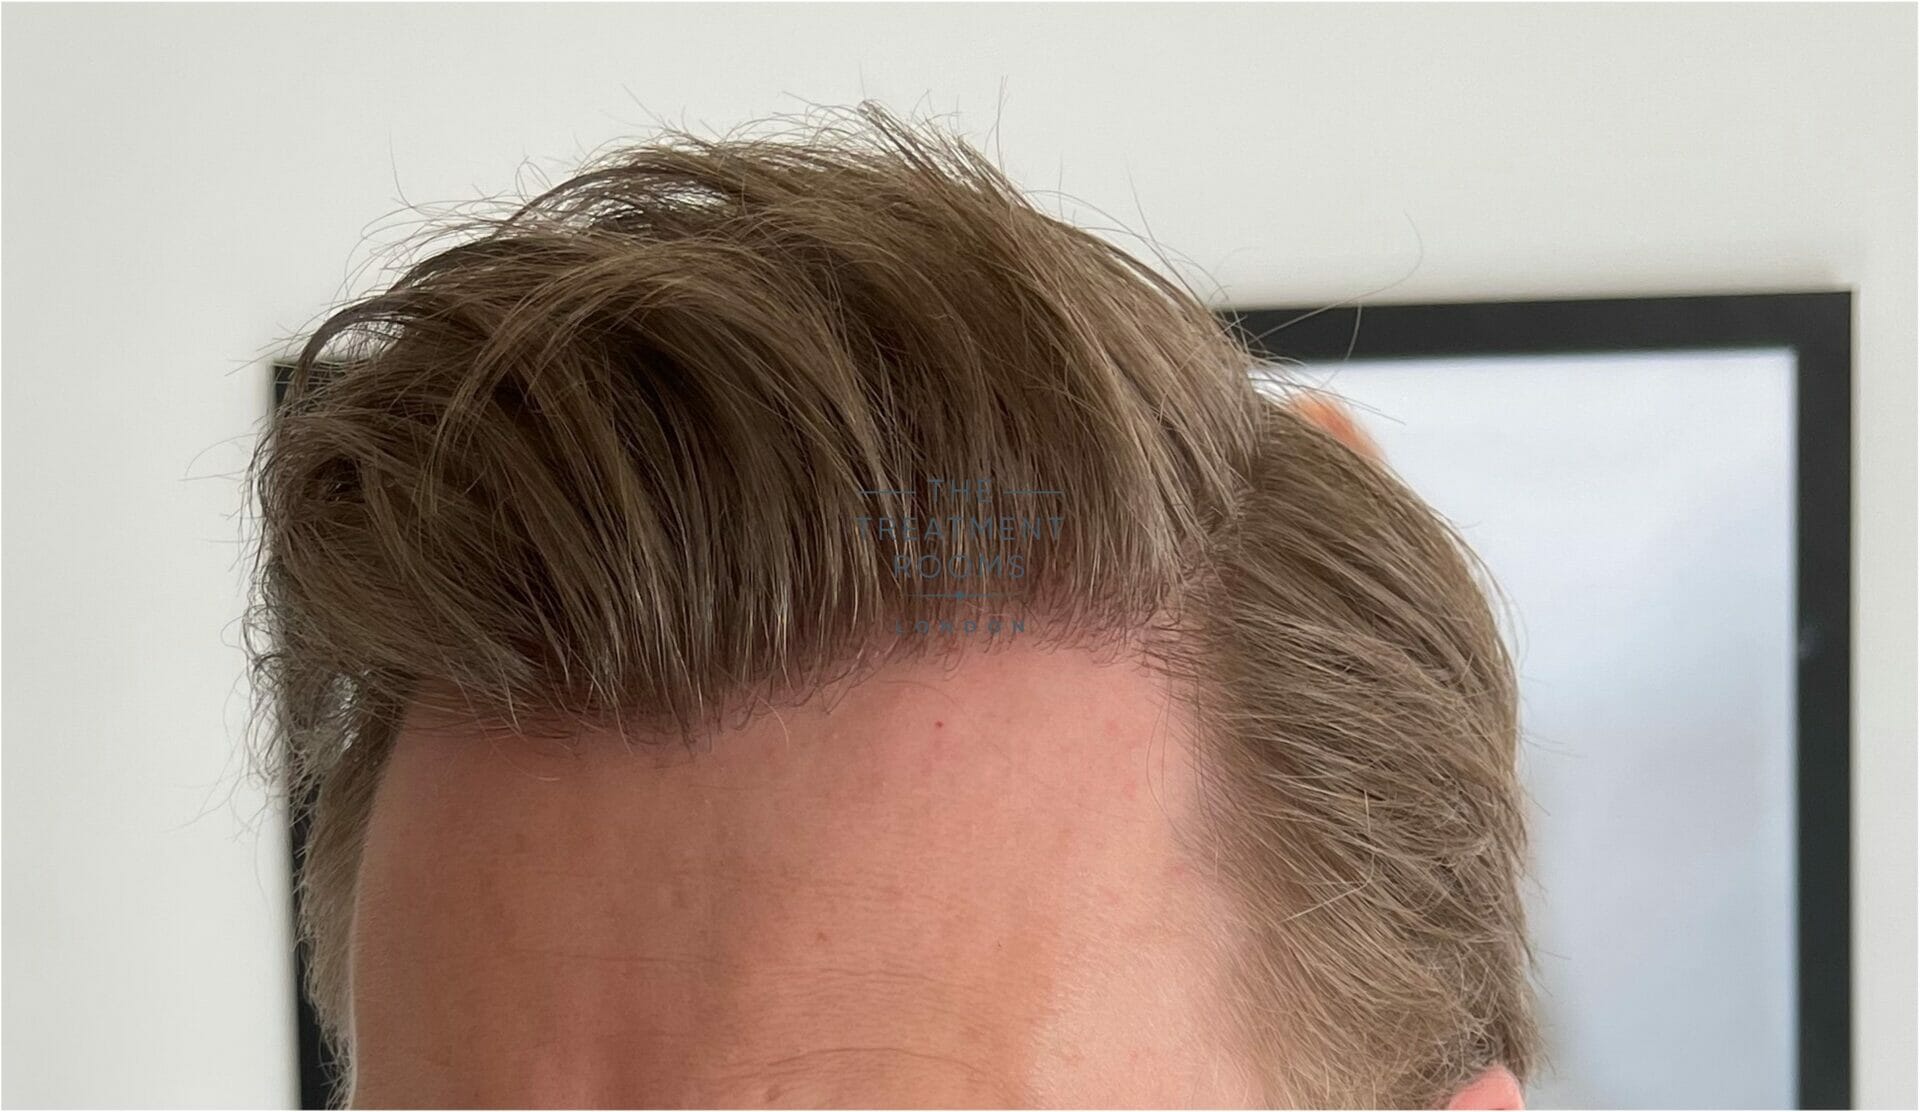 Hair Transplant Result Before and After at DERMACLINIX